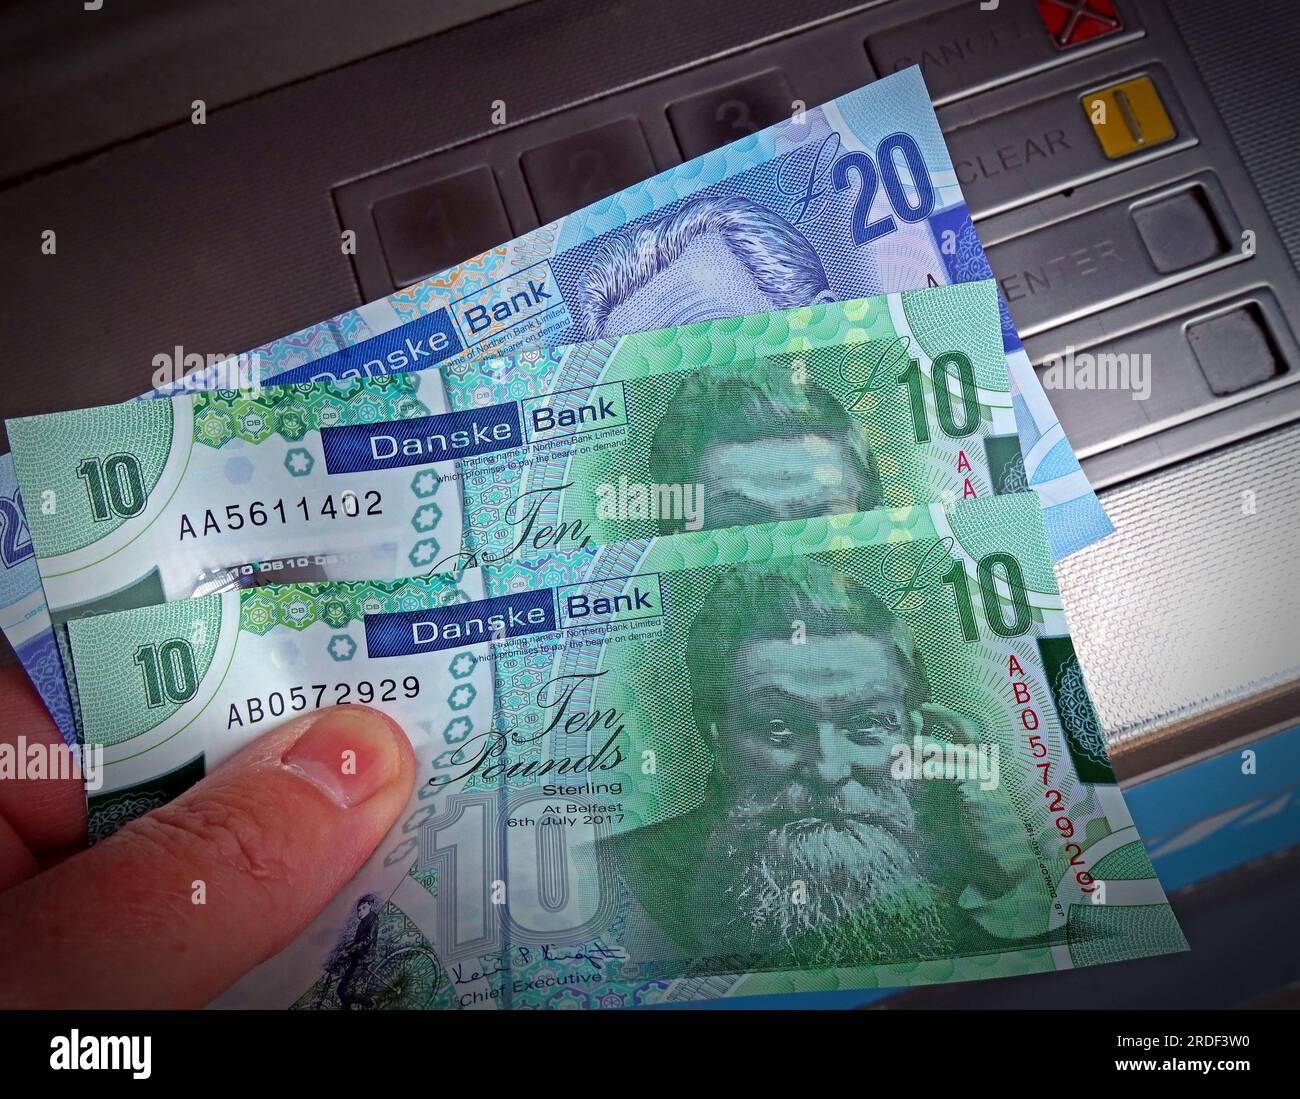 Danske Bank northern Irish Sterling cash notes dispensed from an ATM cash machine, in Londonderry city, Northern Ireland, UK, BT48 7BB Stock Photo